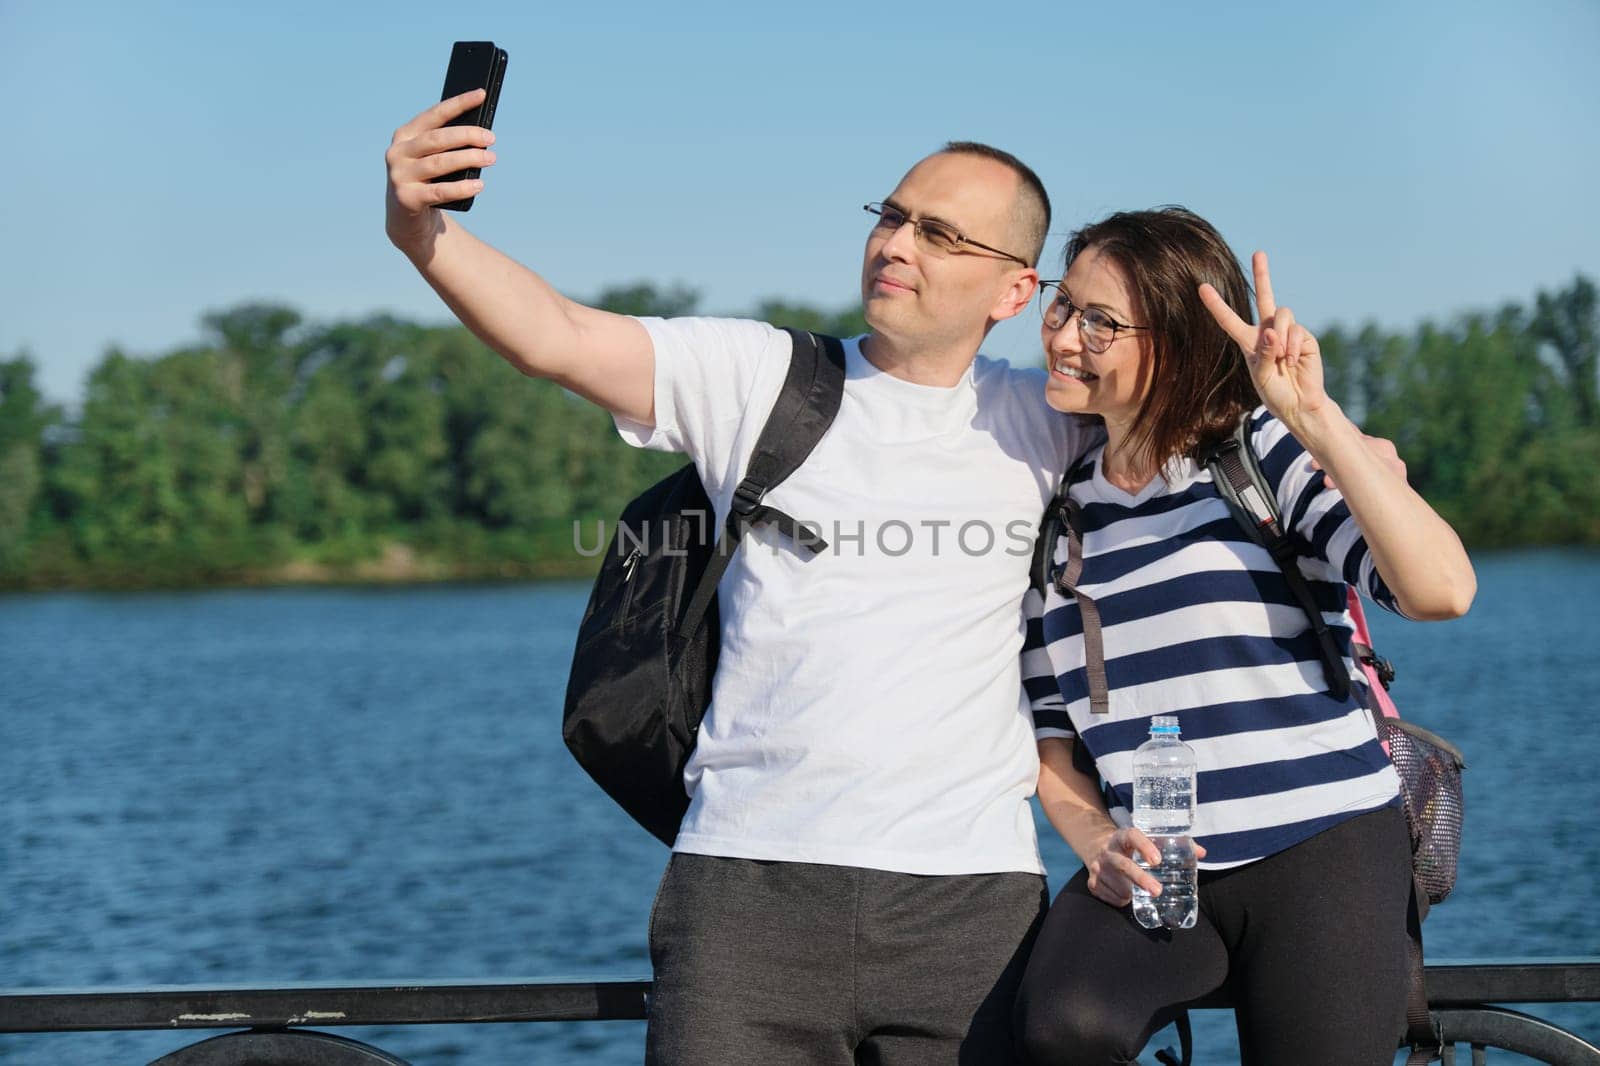 Mature happy couple taking selfie photo on phone, people relaxing near river in summer evening park.